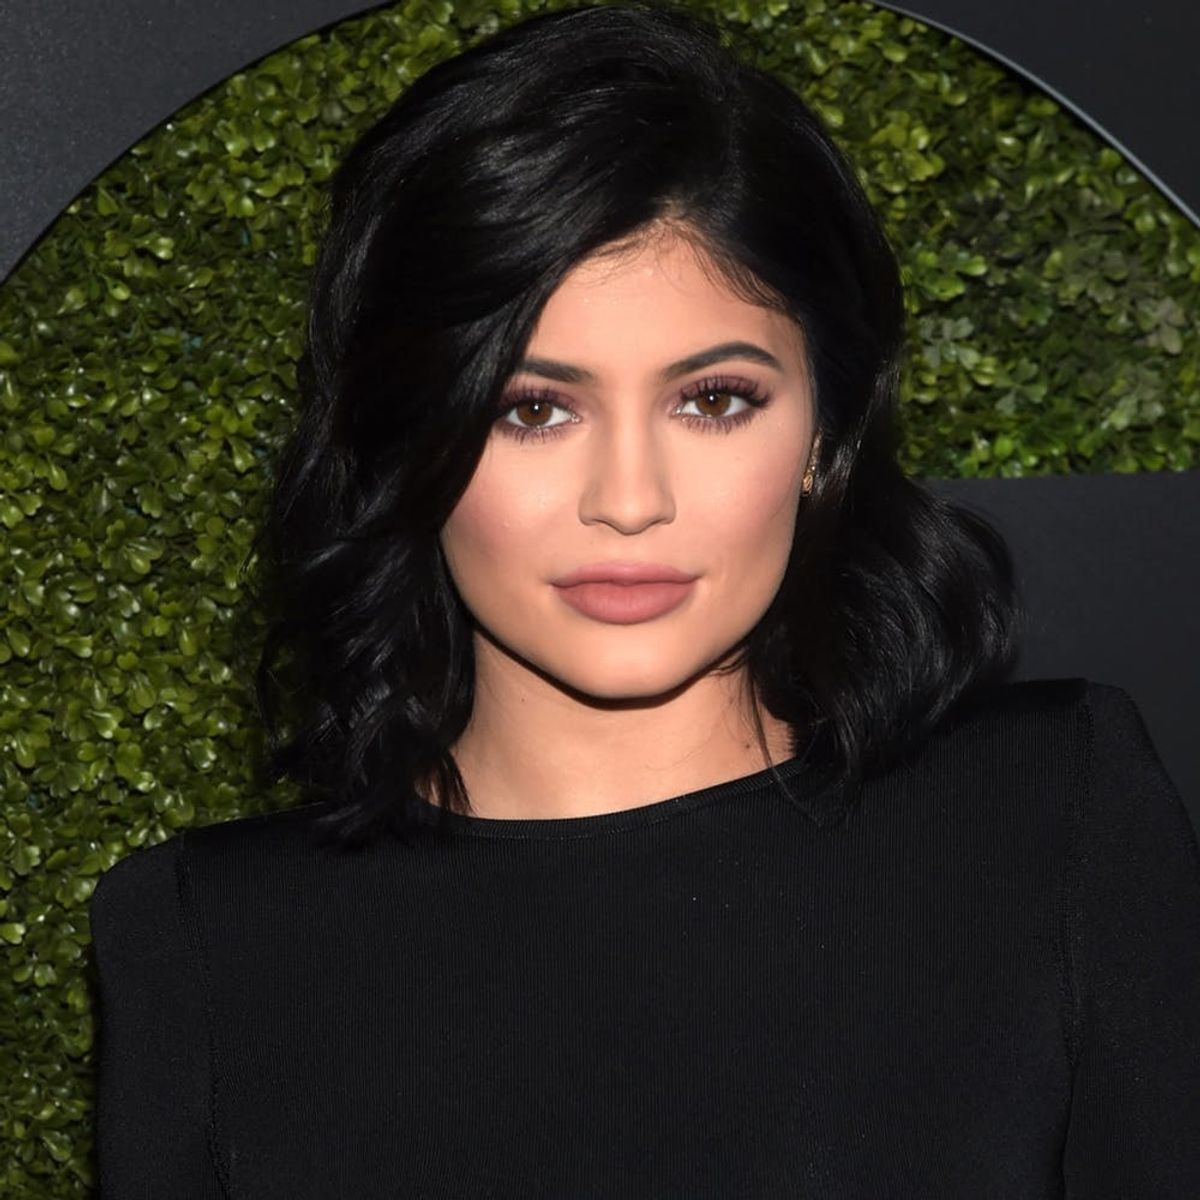 Kylie Jenner’s New Merch Is Stirring Up Major Controversy